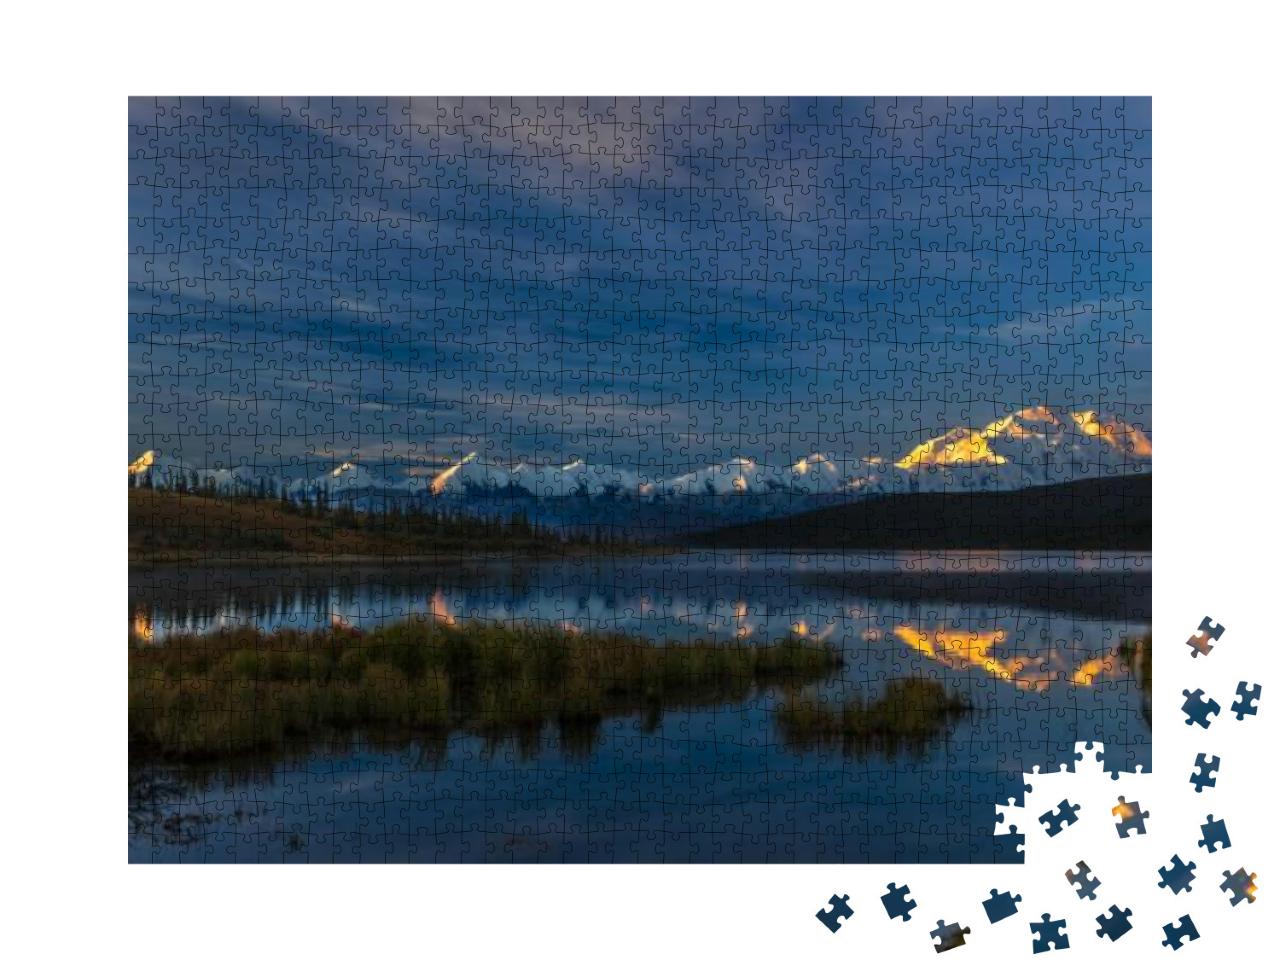 August 30, 2016 - Mount Denali At Wonder Lake, Previously... Jigsaw Puzzle with 1000 pieces